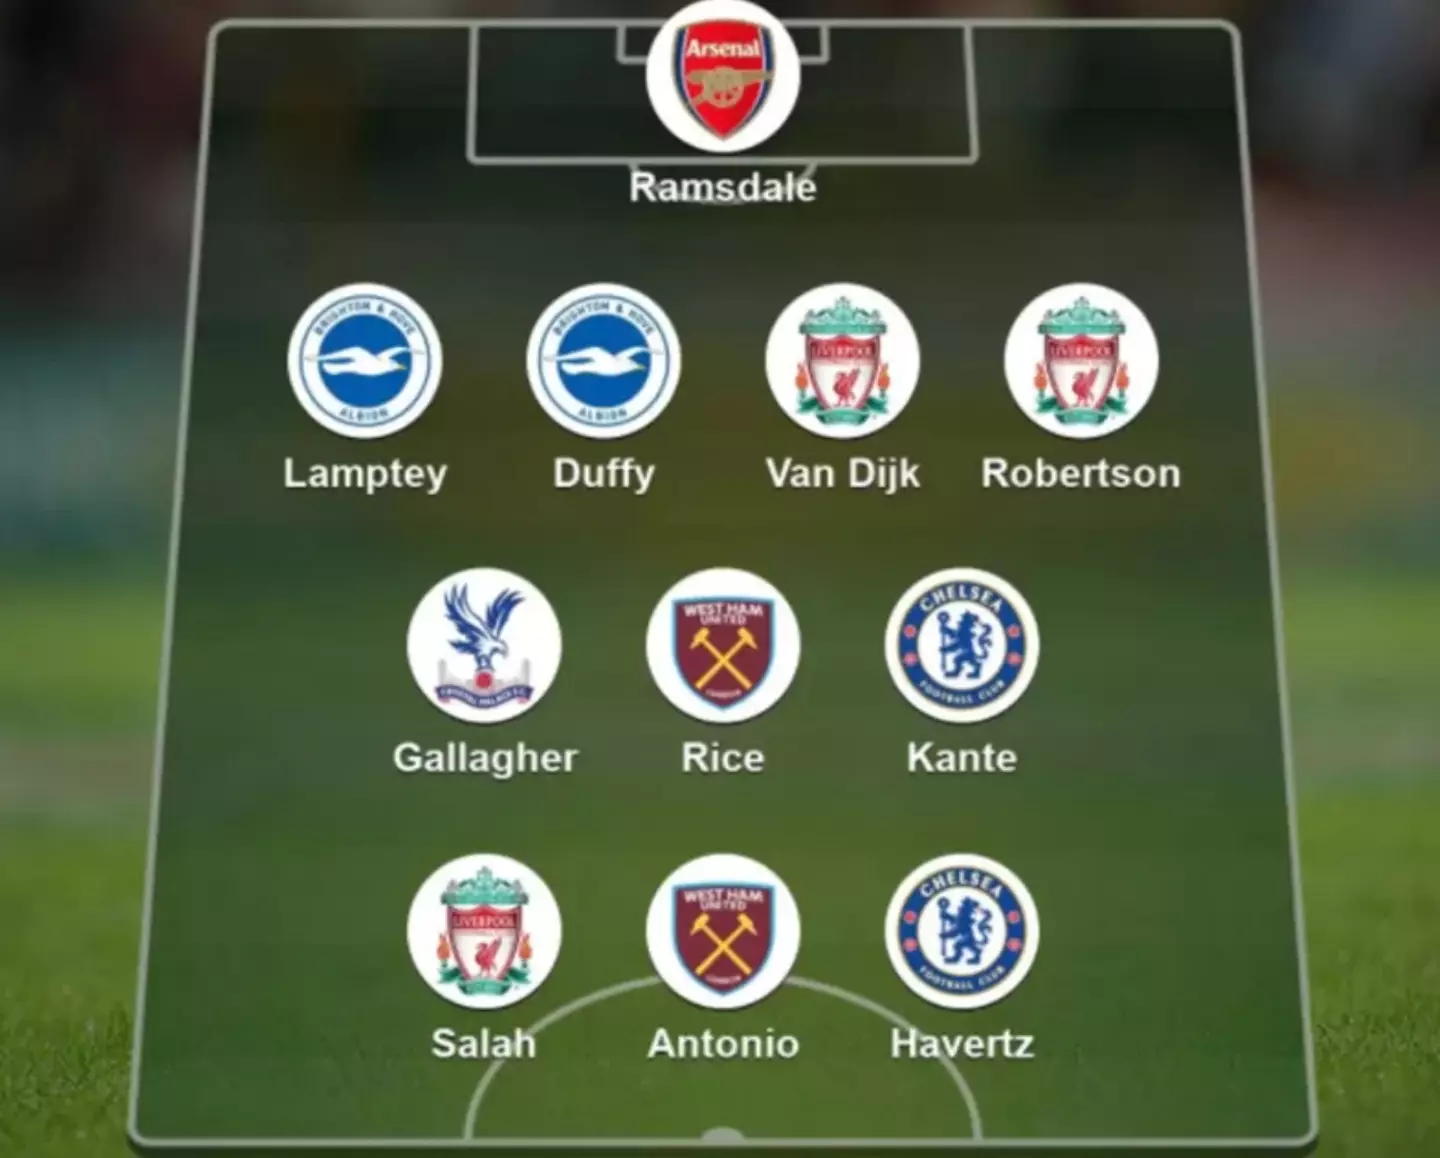 Not one Manchester City player was named in the team (Image: BBC)